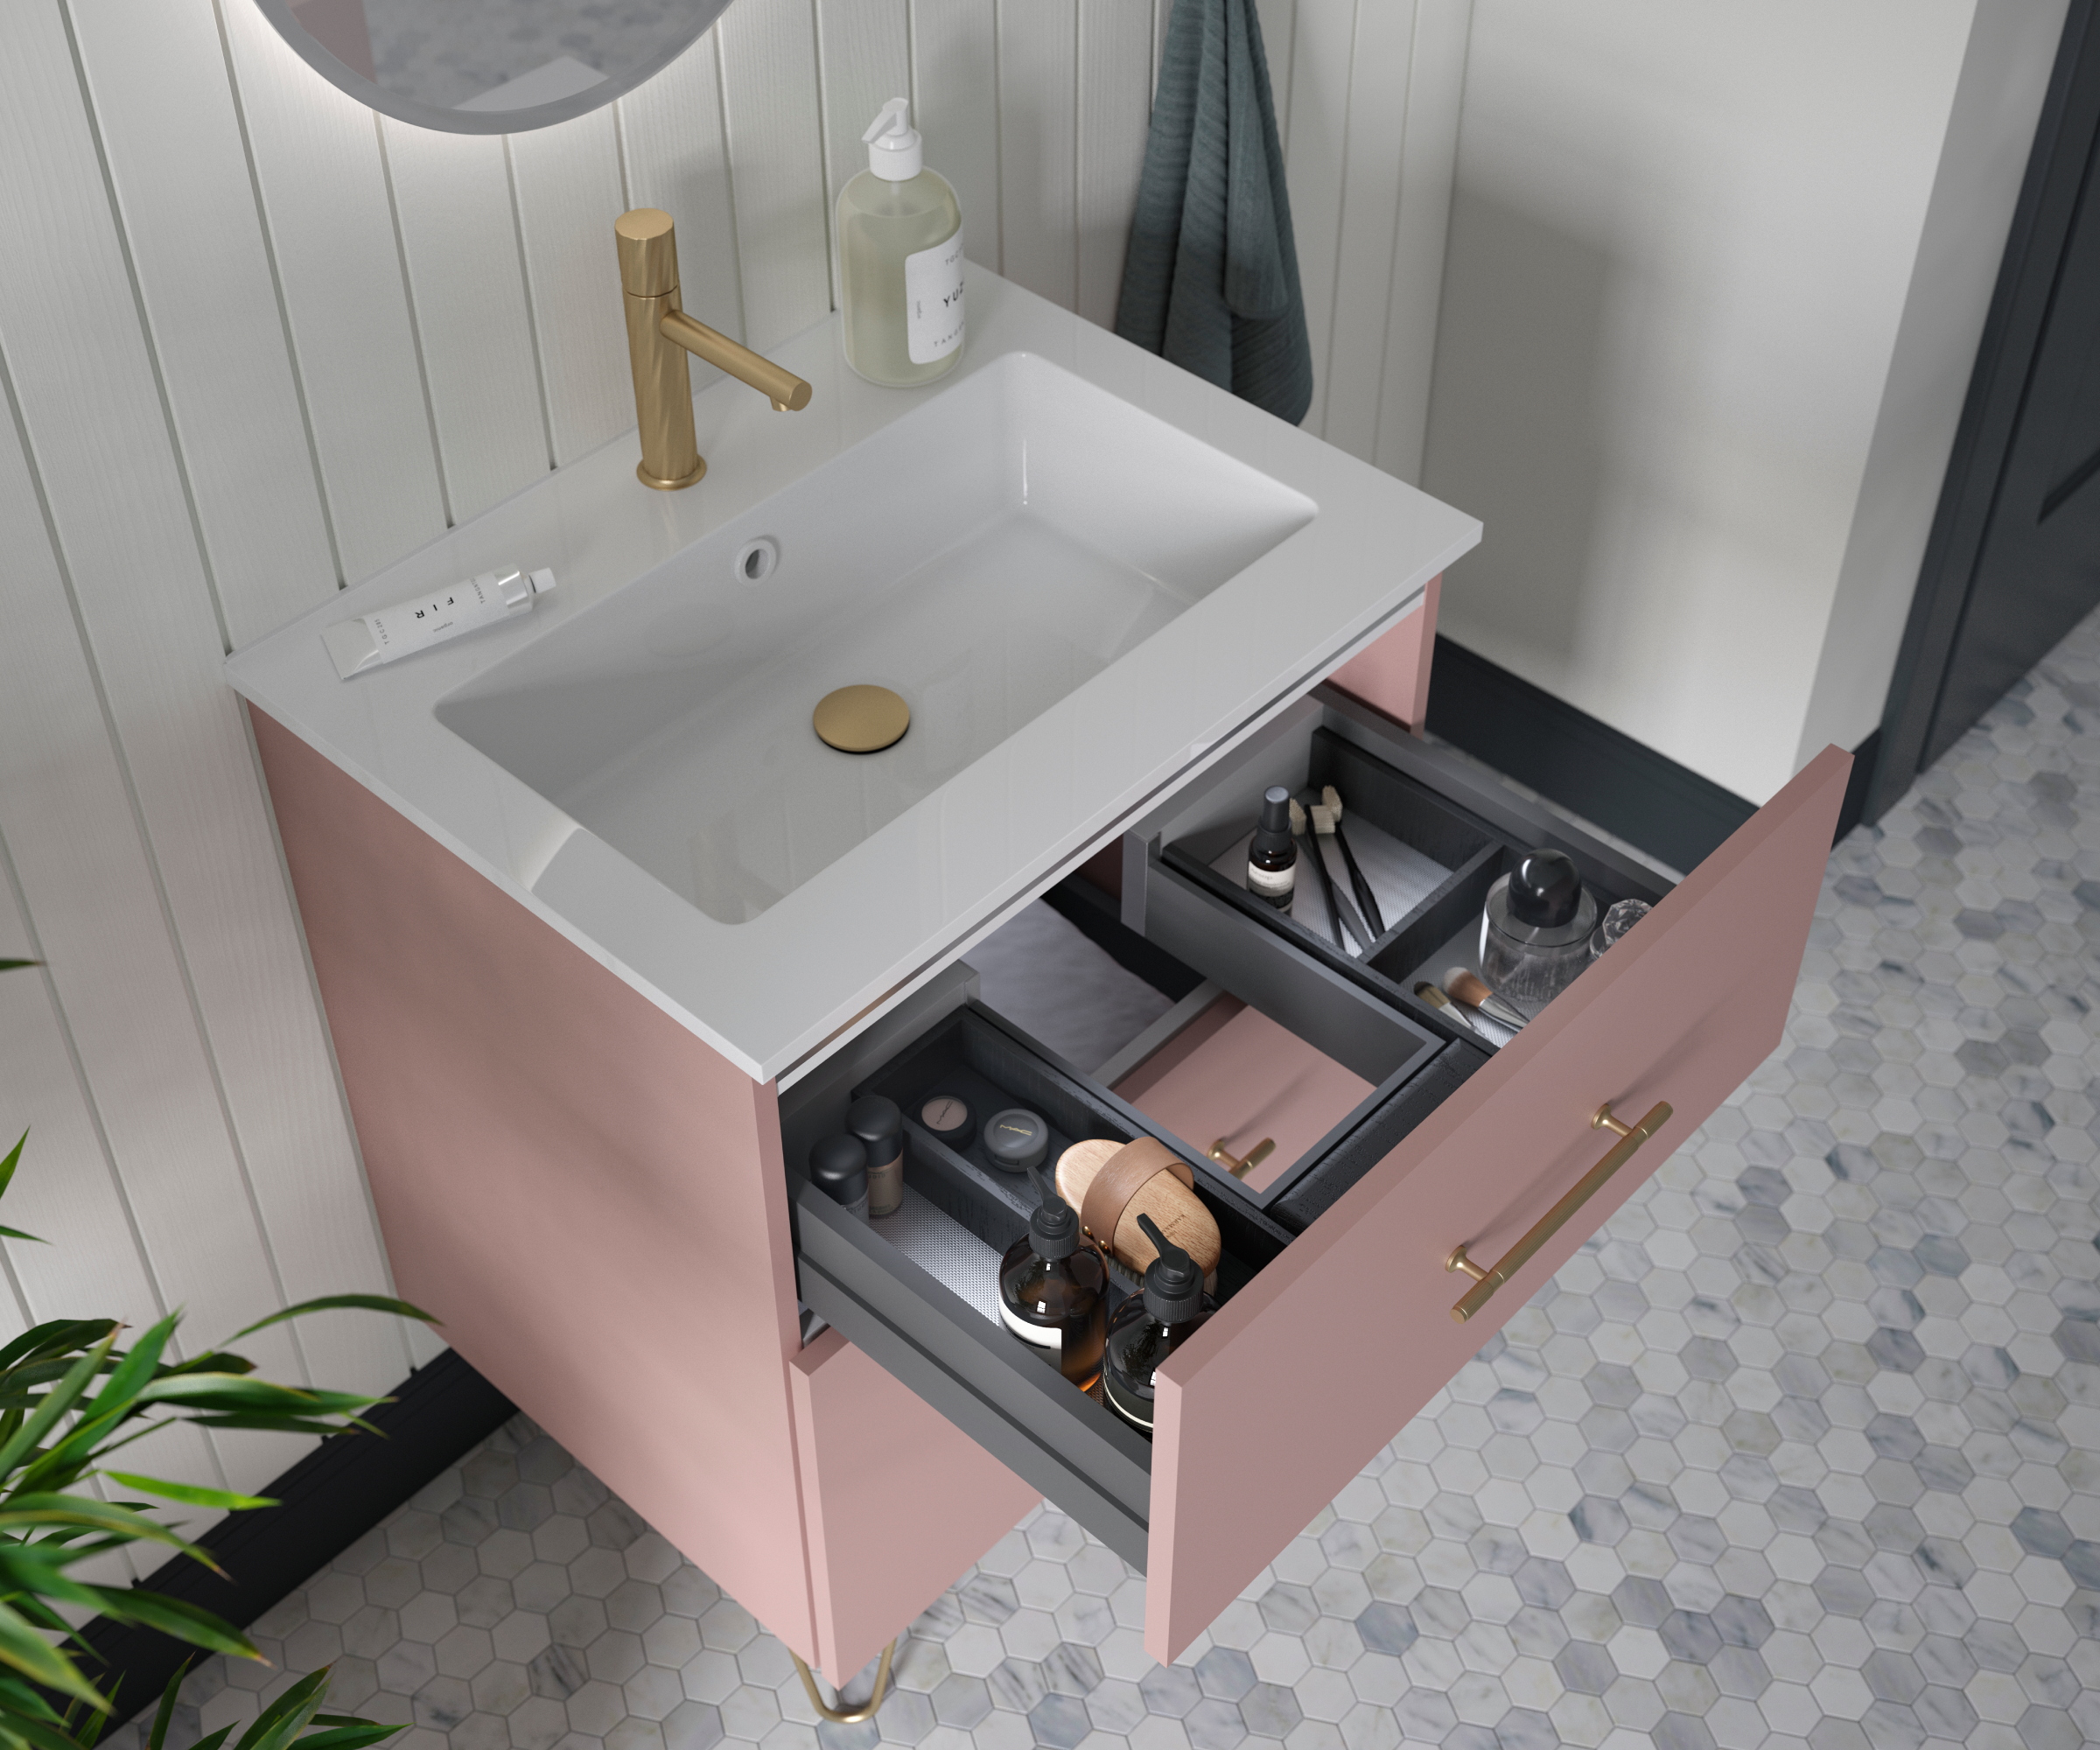 pink vanity unit with white sink, one drawer open to show contents